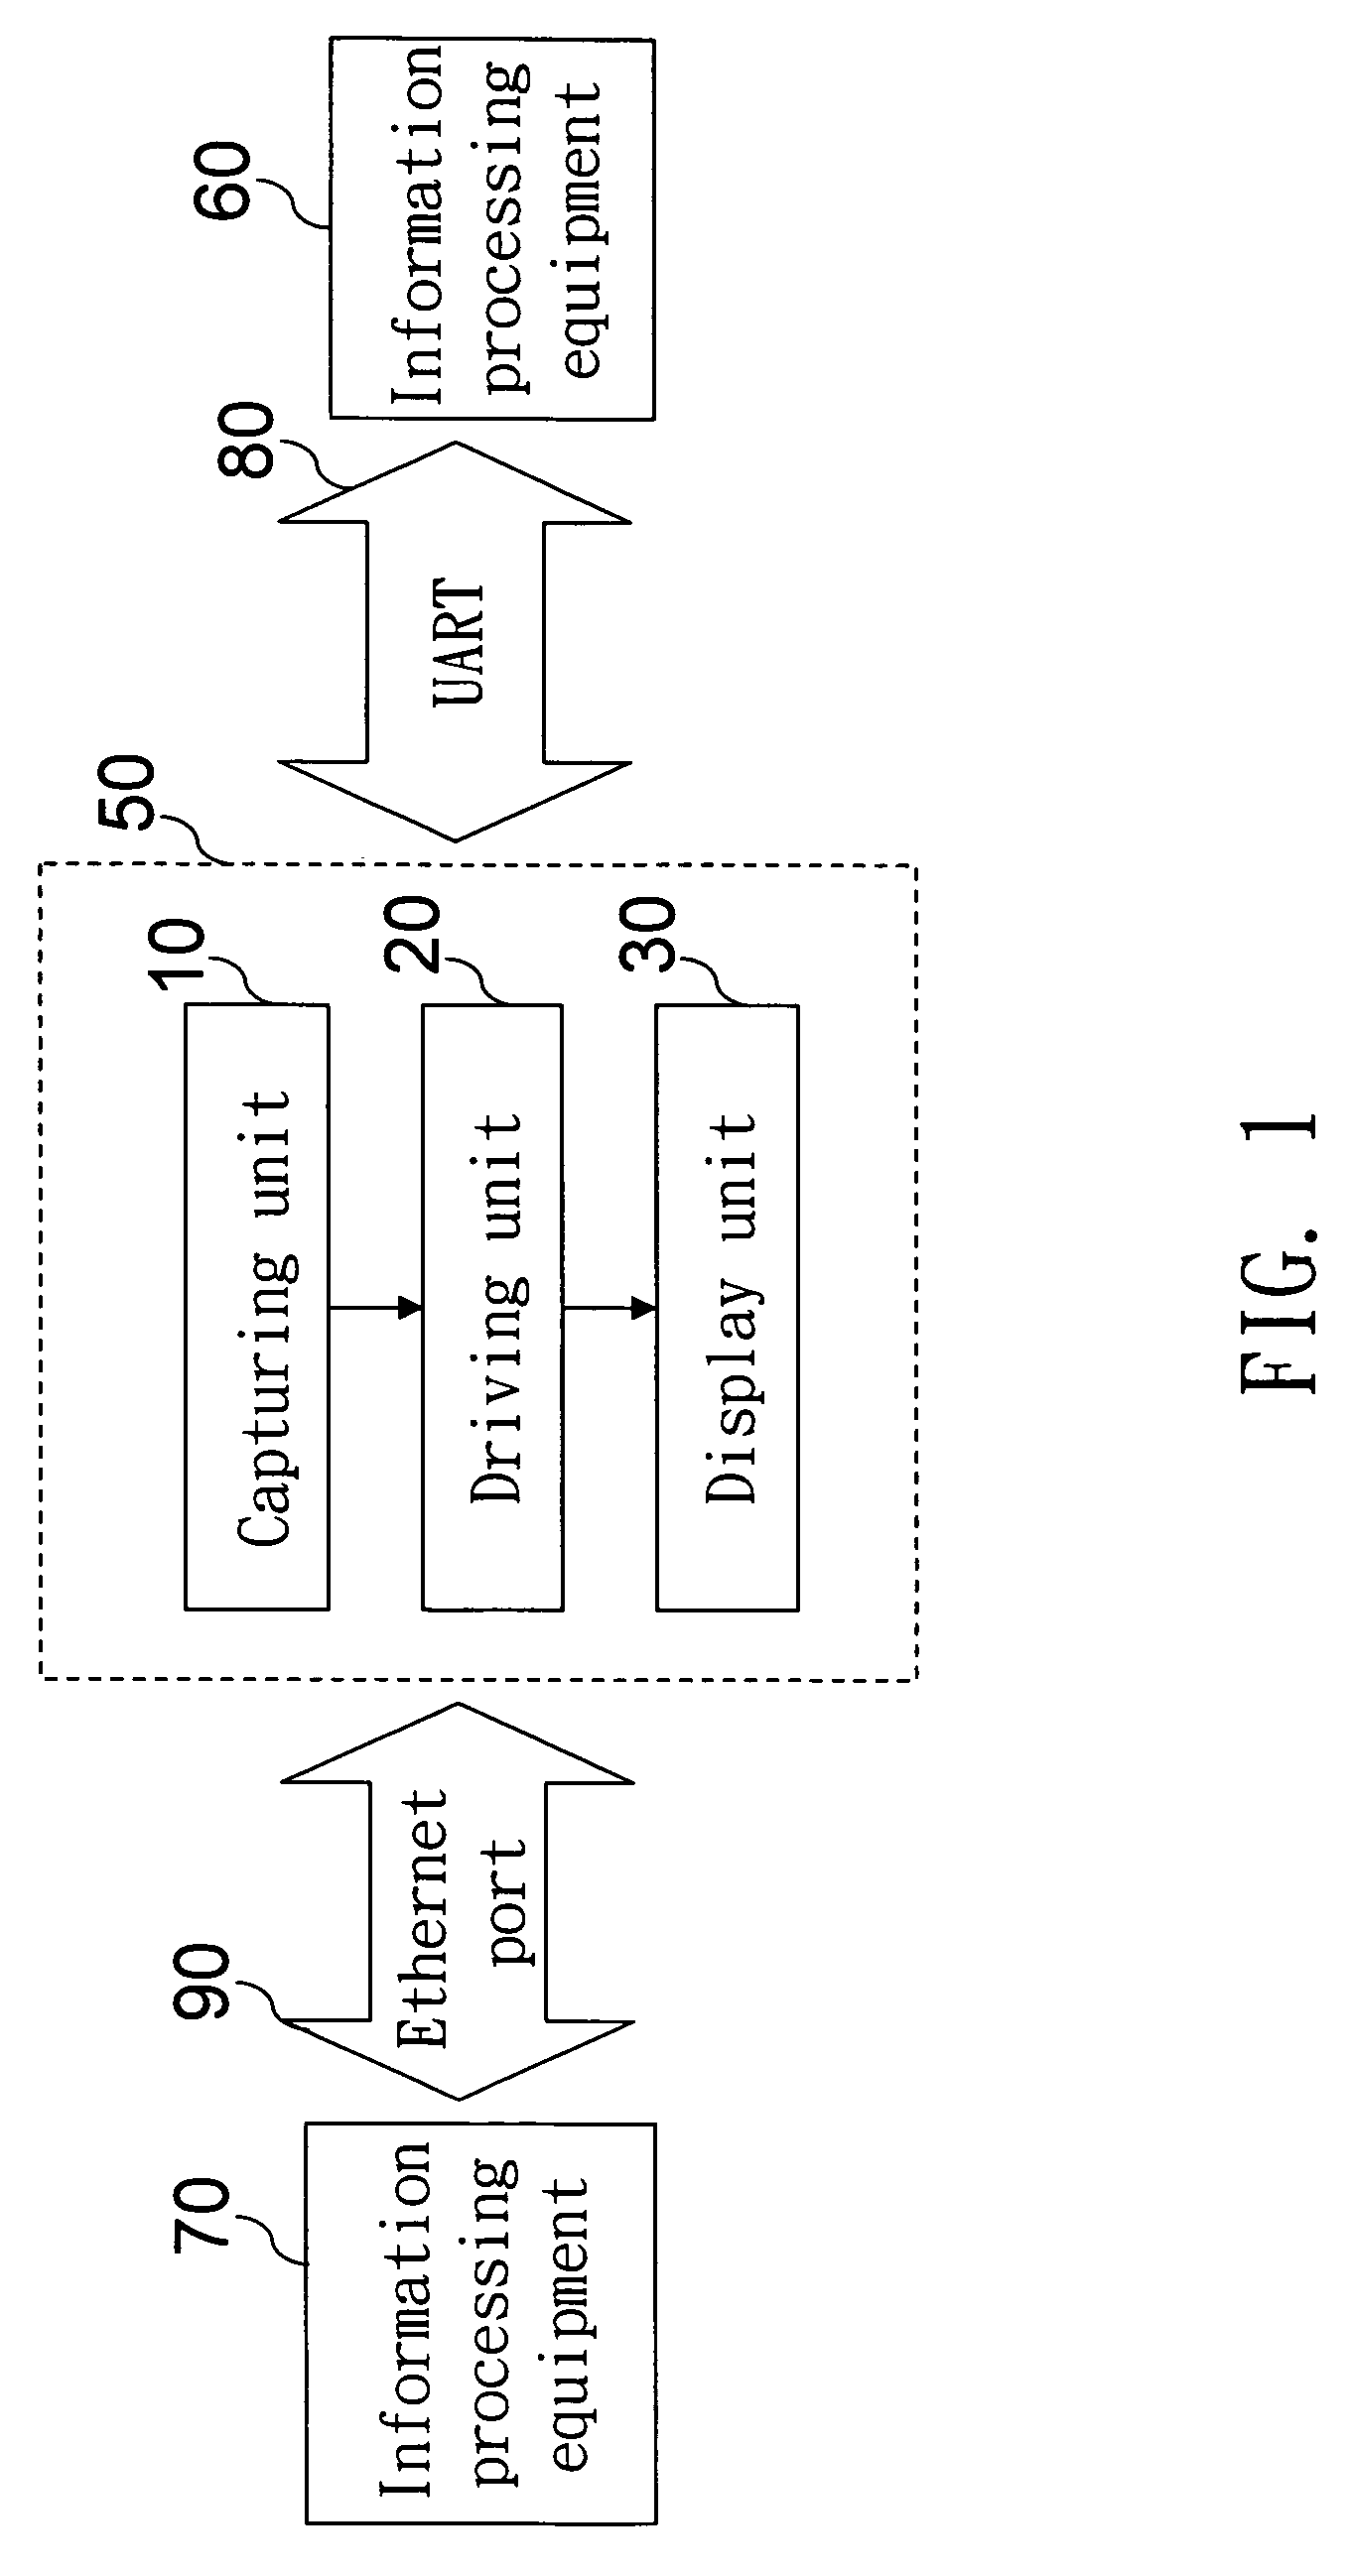 Status display-enabled connector for a universal asynchronous receiver/transmitter